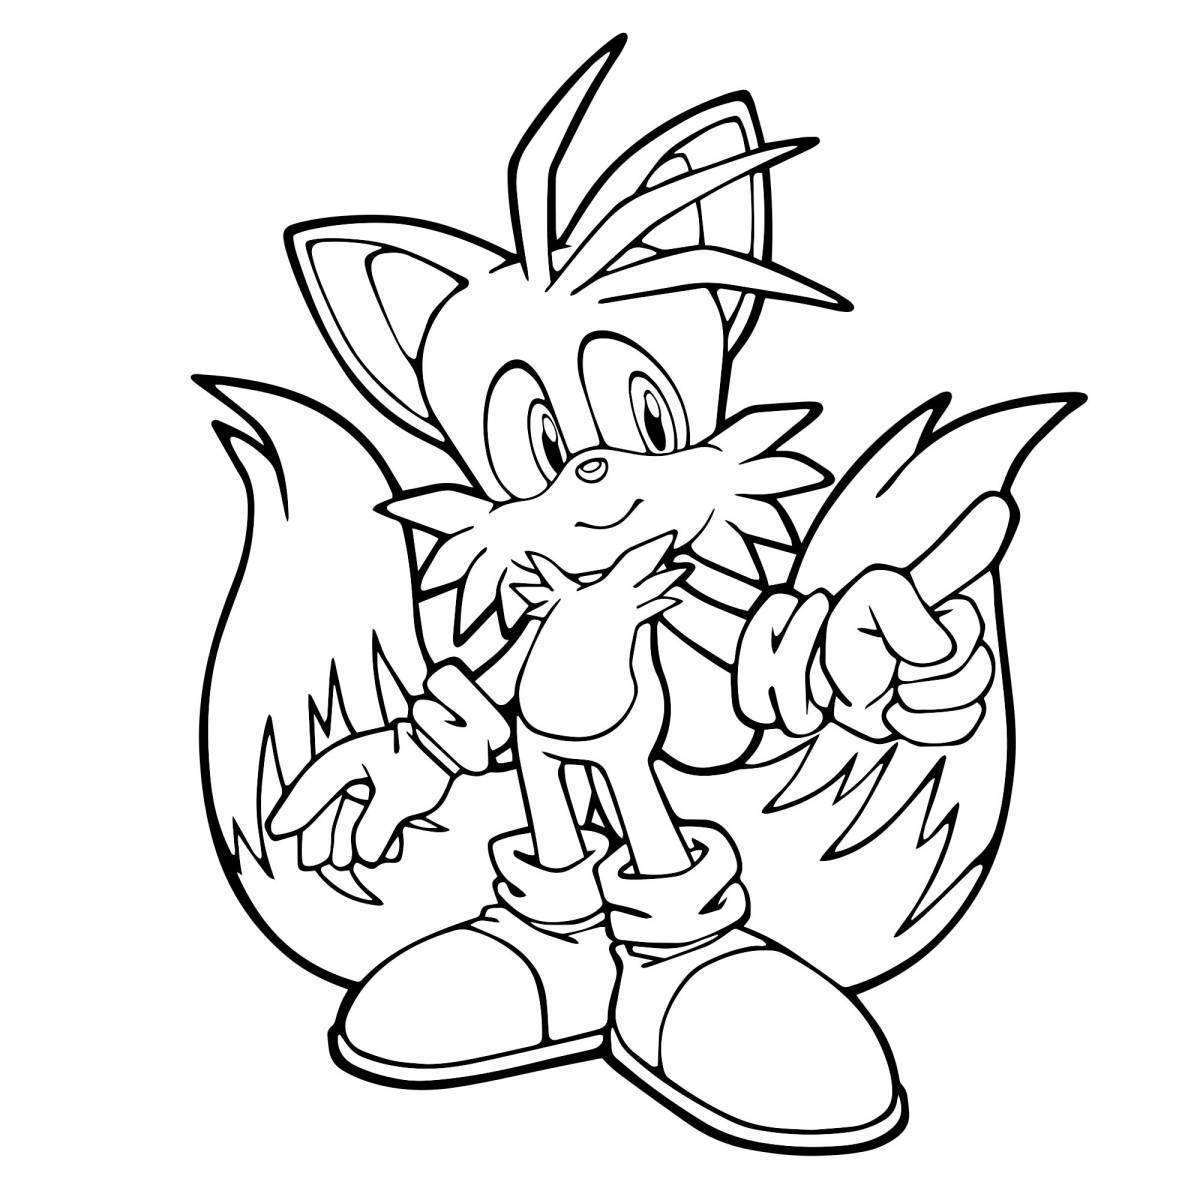 Awesome sonic and tails coloring page